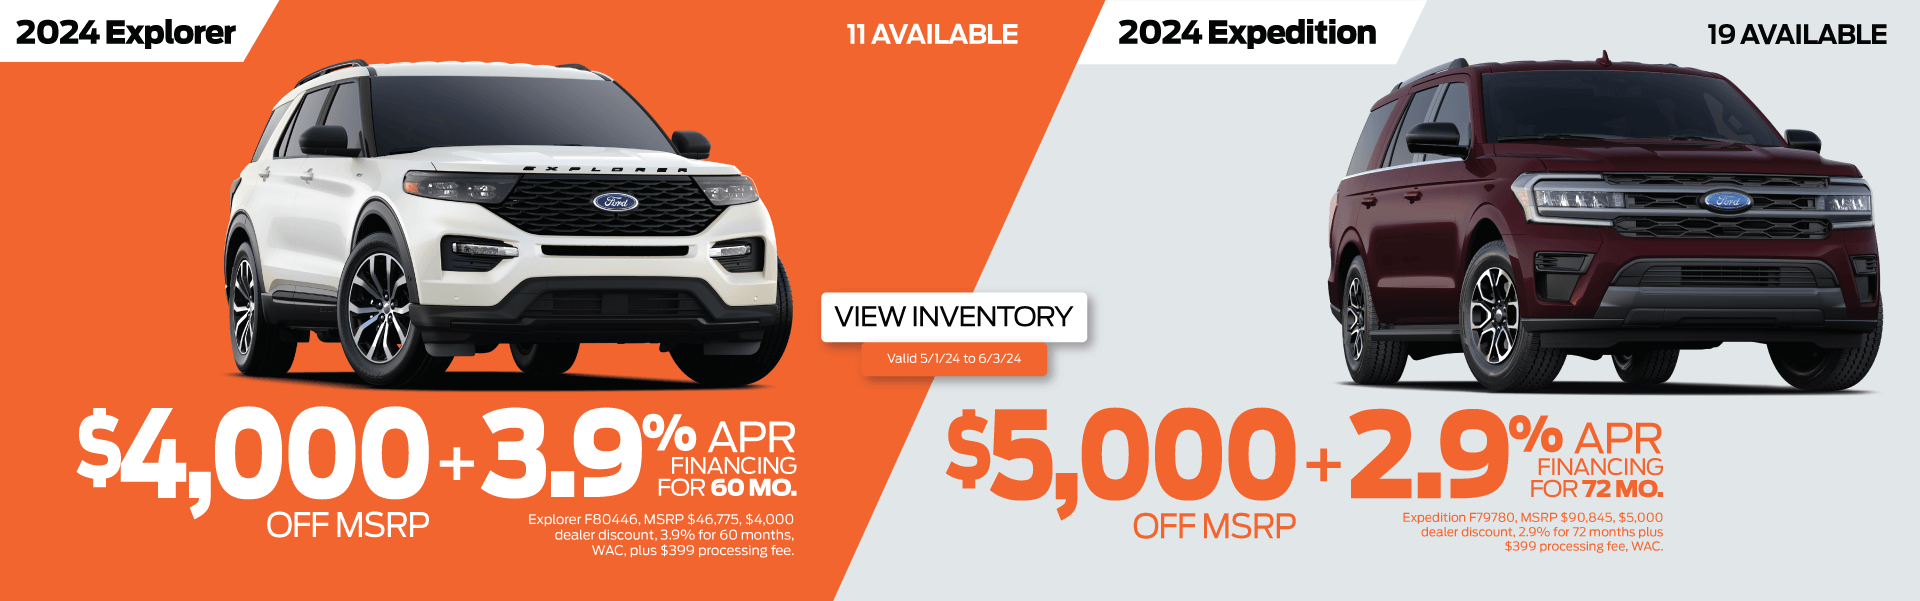 Discount and Financing on New Ford Explorer and Expedition